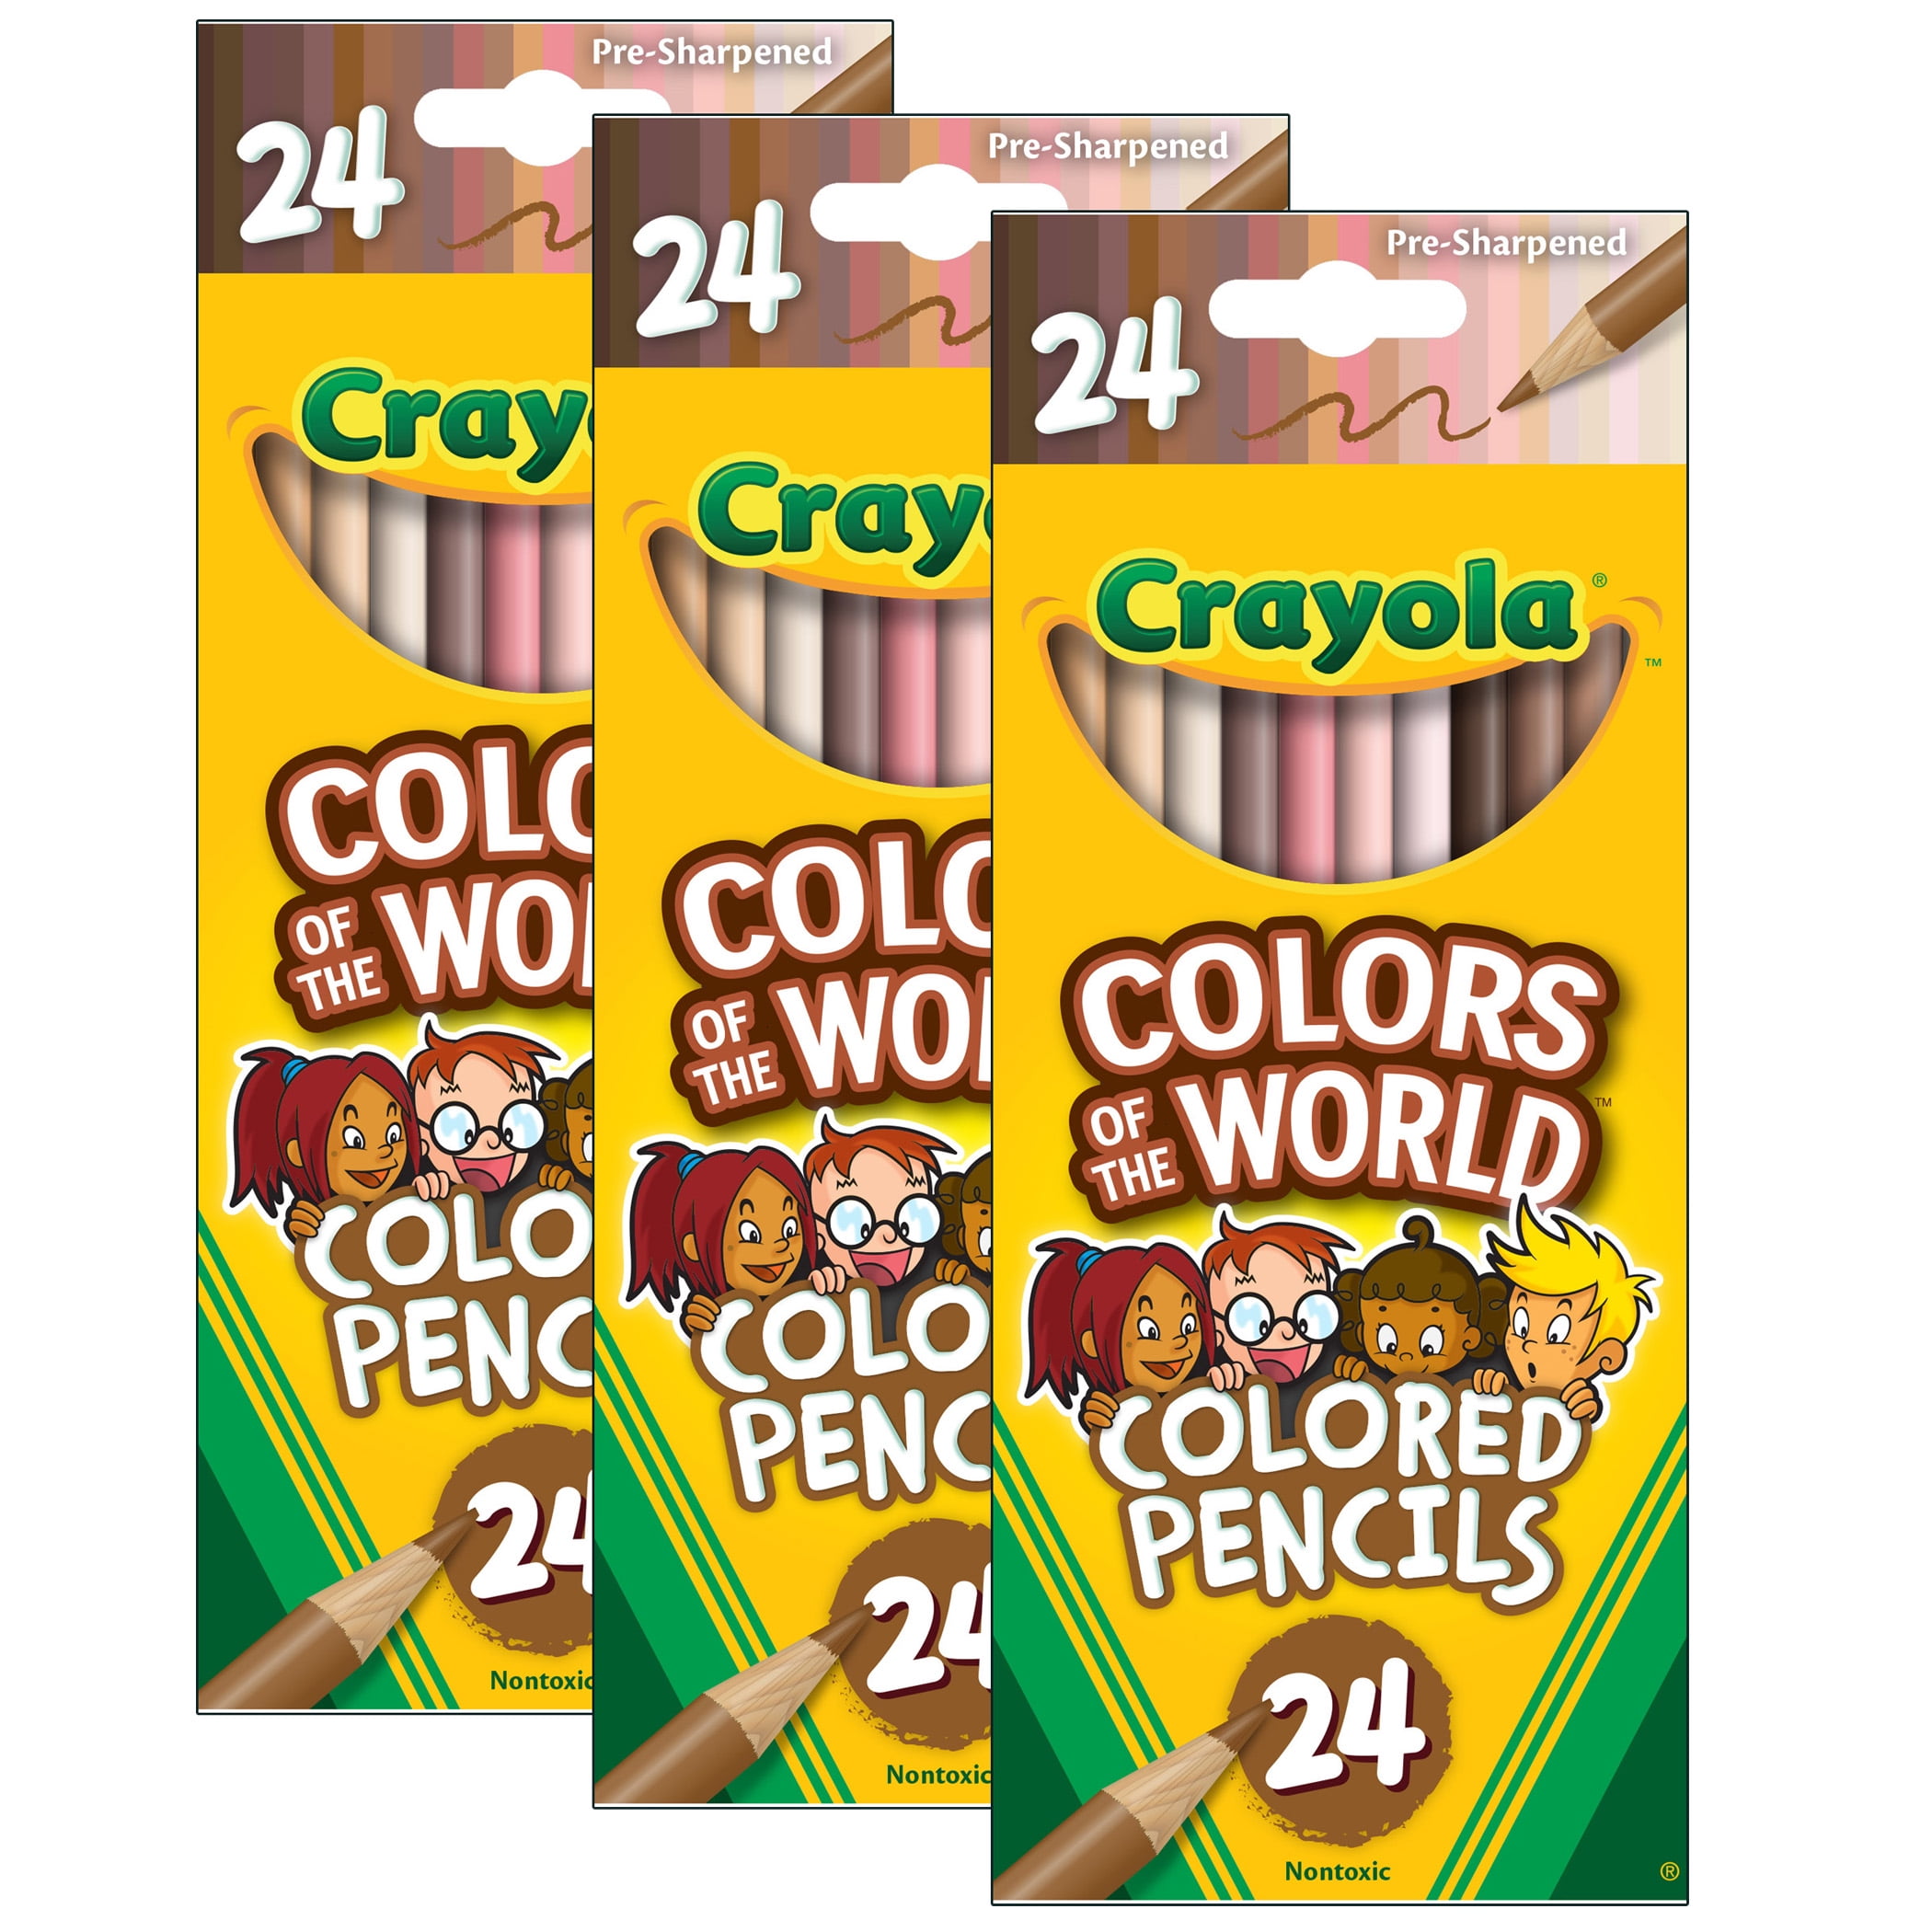 GiftsOfJoy Colors of The World Multicultural Art Kit. Includes 24ct Multicultural Crayons, 24ct Colored Pencils, 24ct Markers, and An Exclusive